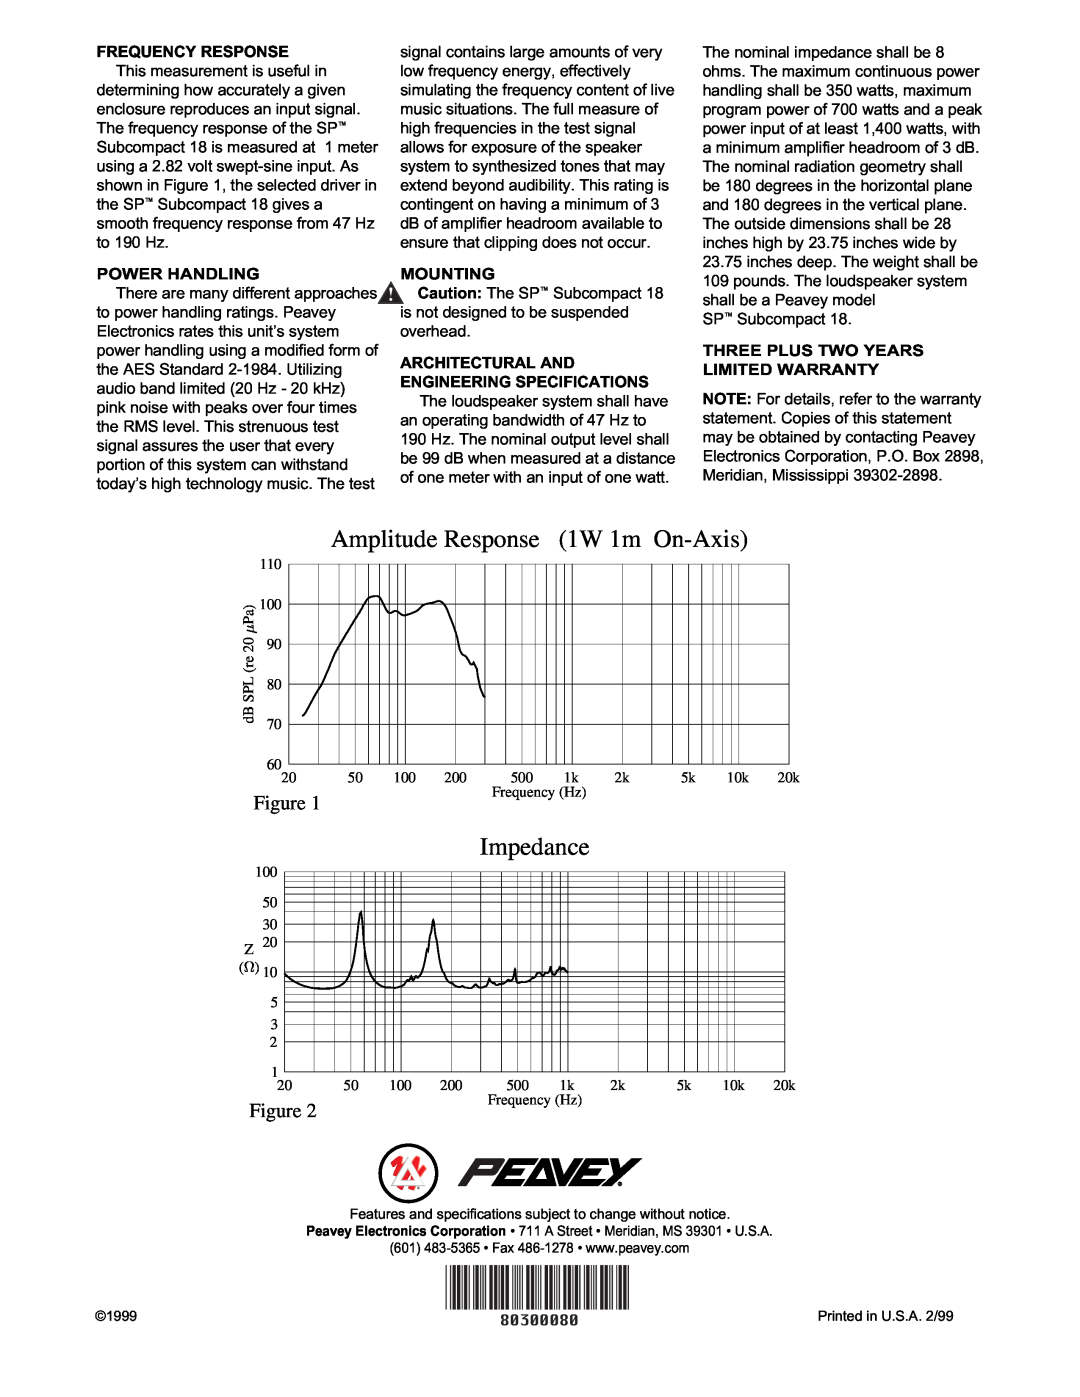 Peavey 18 Amplitude Response 1W 1m On-Axis, Impedance, FREQUENCY RESPONSE This measurement is useful in, Power Handling 